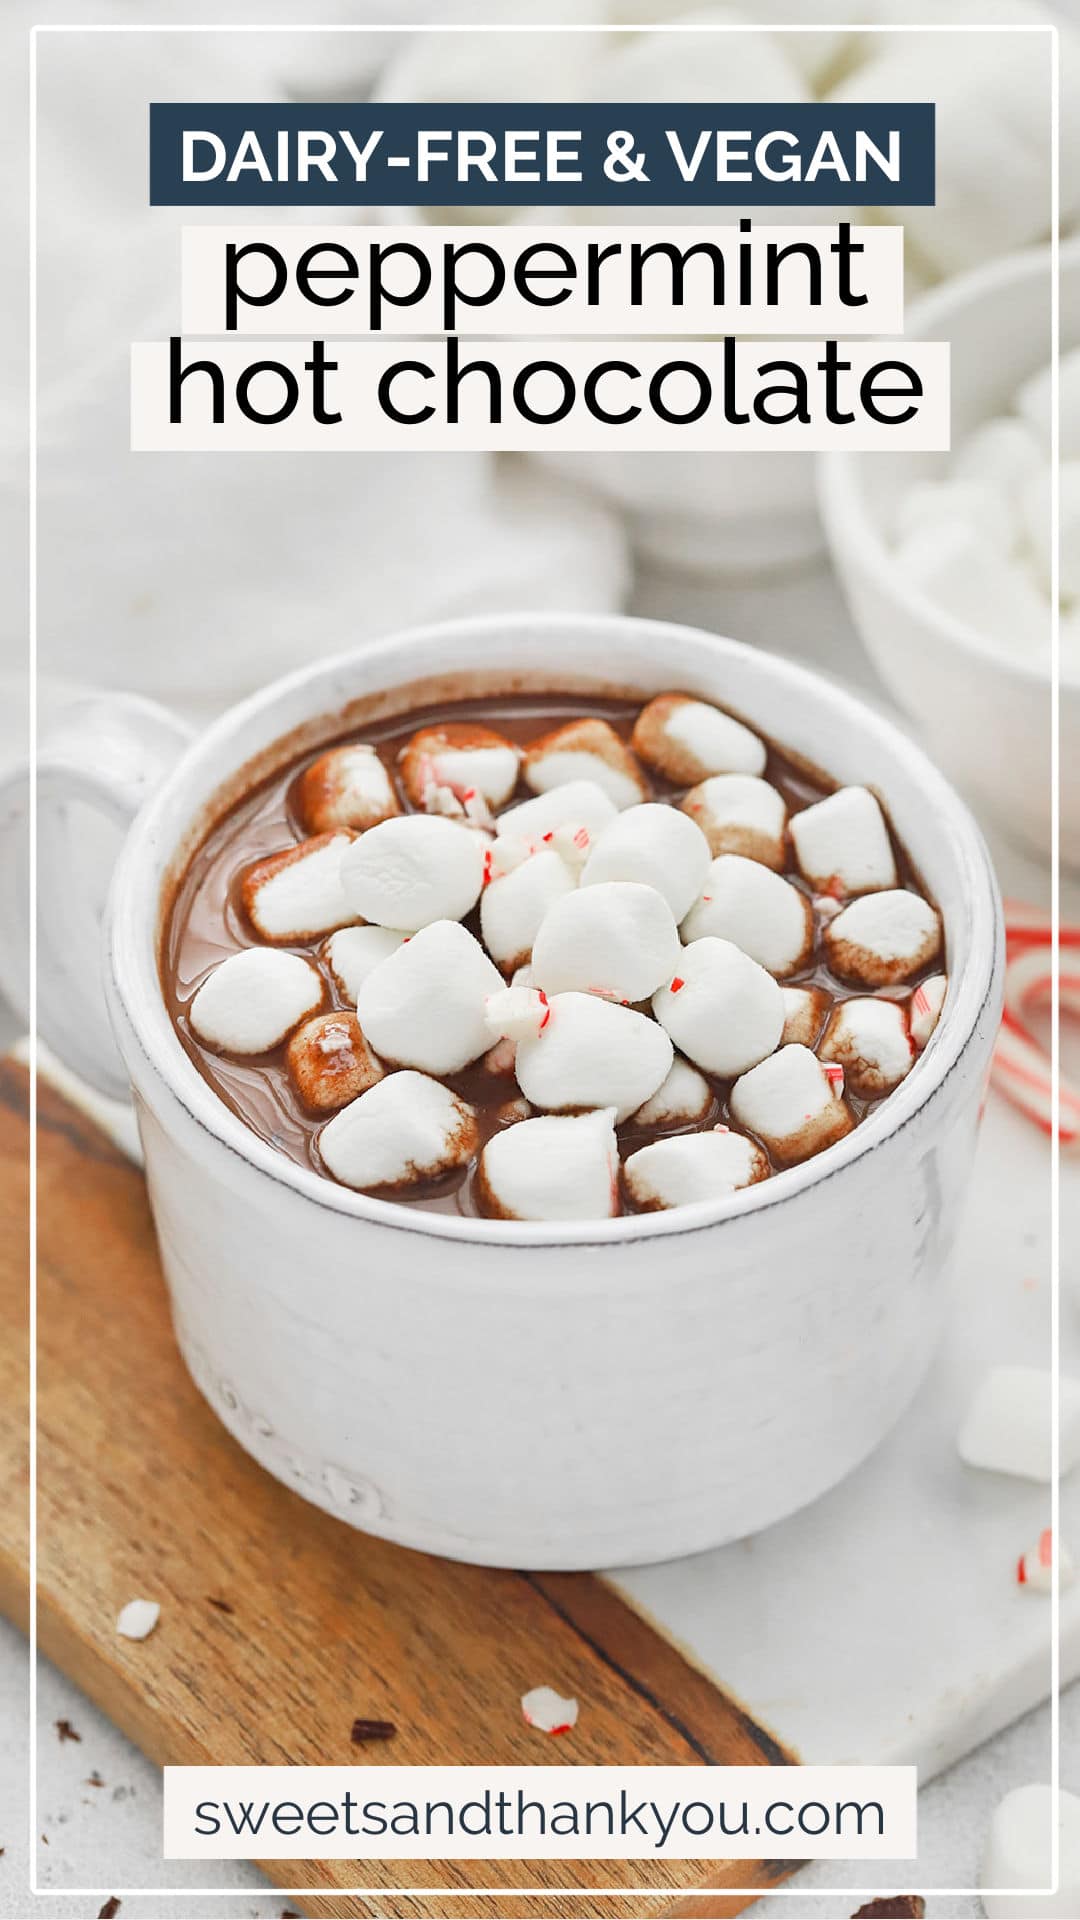 Vegan Peppermint Hot Chocolate - This dairy-free peppermint hot chocolate recipe is so warm and cozy! You'll love the creamy texture and warm peppermint flavor! / vegan hot chocolate recipe / vegan hot cocoa recipe / vegan peppermint hot cocoa / dairy free peppermint hot cocoa / healthy hot cocoa recipe / dairy free hot cocoa recipe / peppermint hot cocoa recipe / homemade peppermint hot chocolate / homemade peppermint hot cocoa